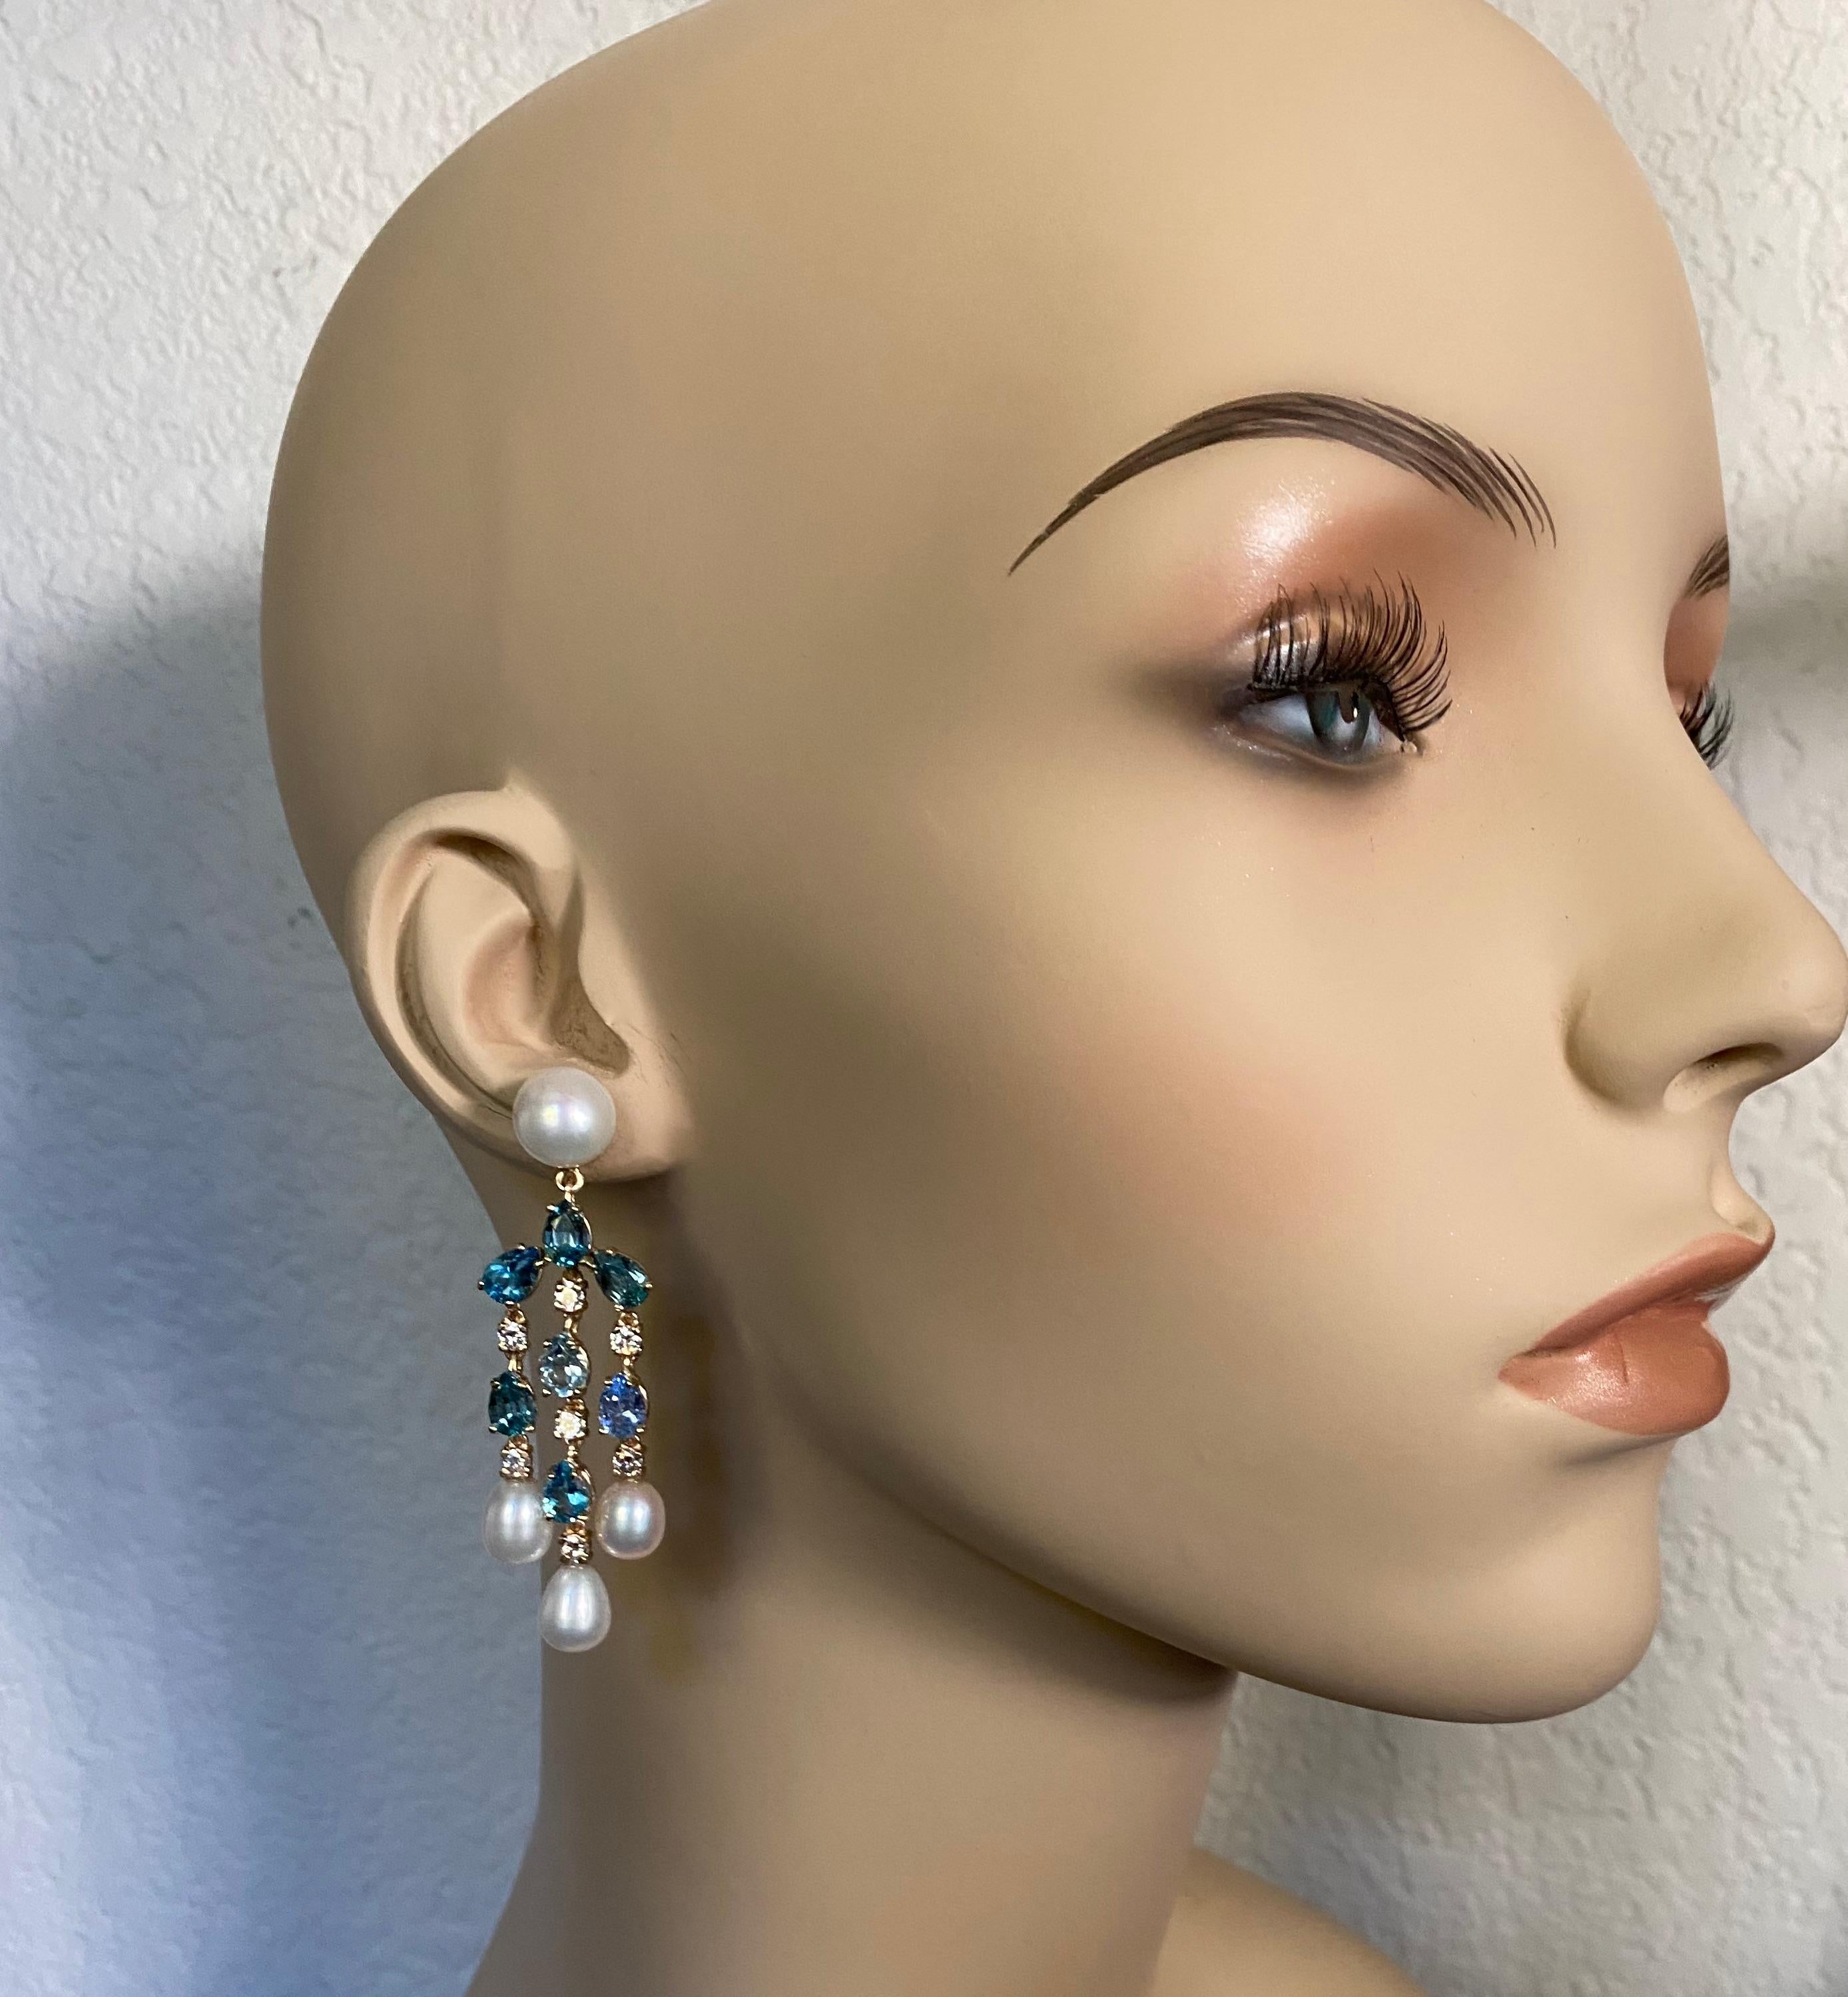 A medley of blue gems are combined with diamonds and pearls is these distinctive chandelier earrings.  Pear shaped aquamarine, tanzanite, zircon and blue topaz have been artfully blended to create and icy waterfall effect.  Brilliant cut diamonds